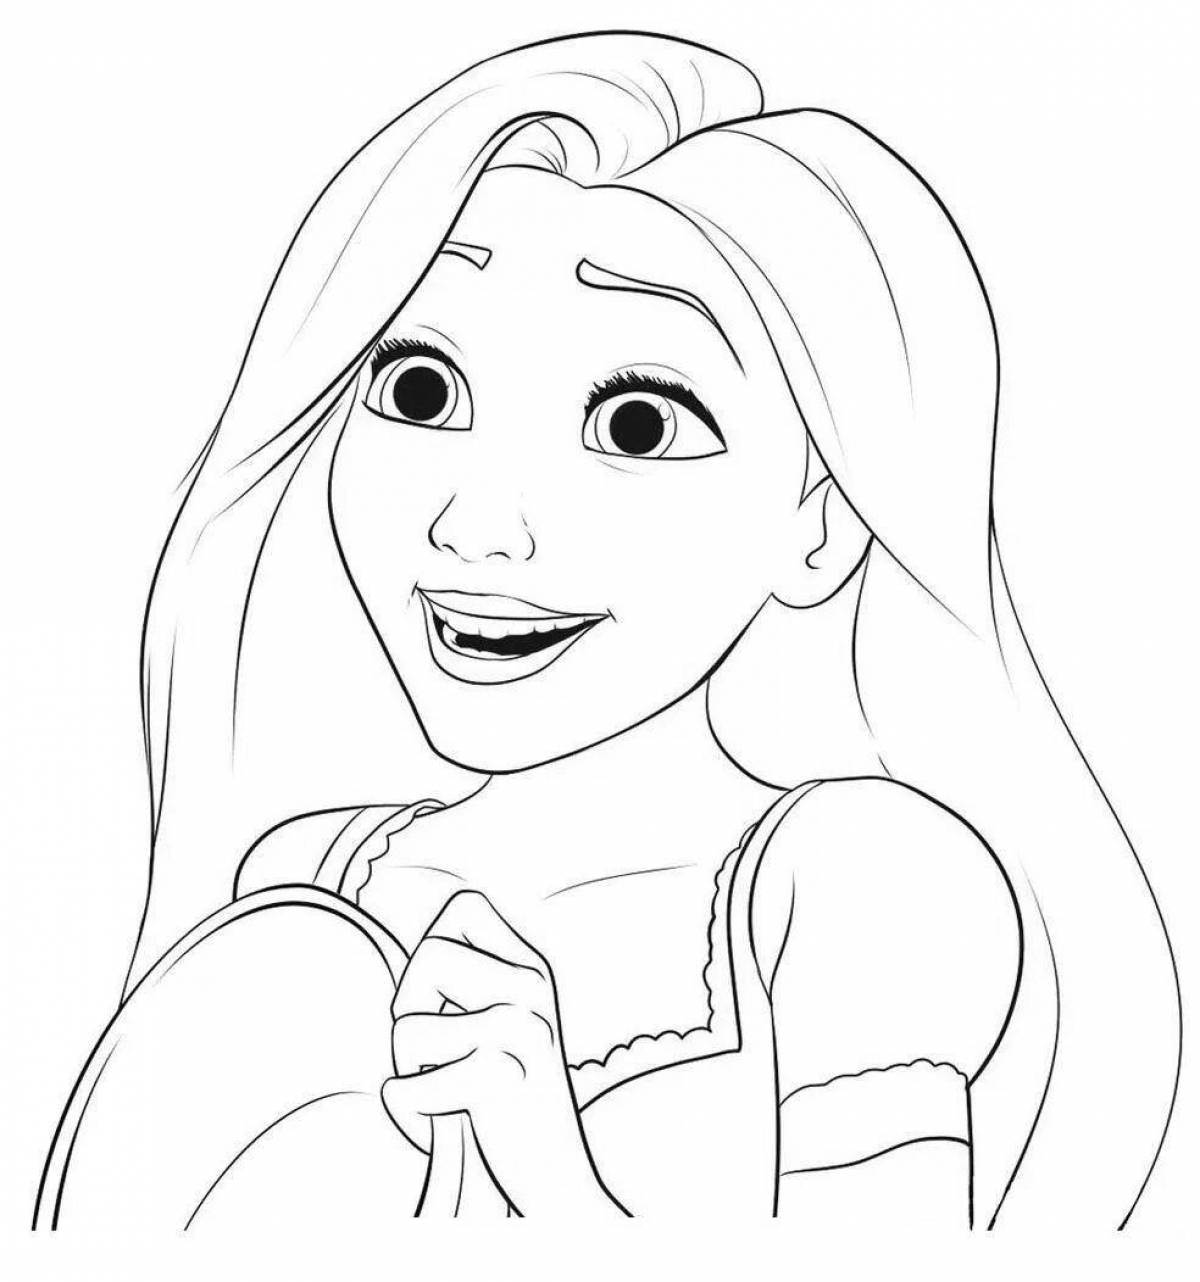 Animated coloring pages include some